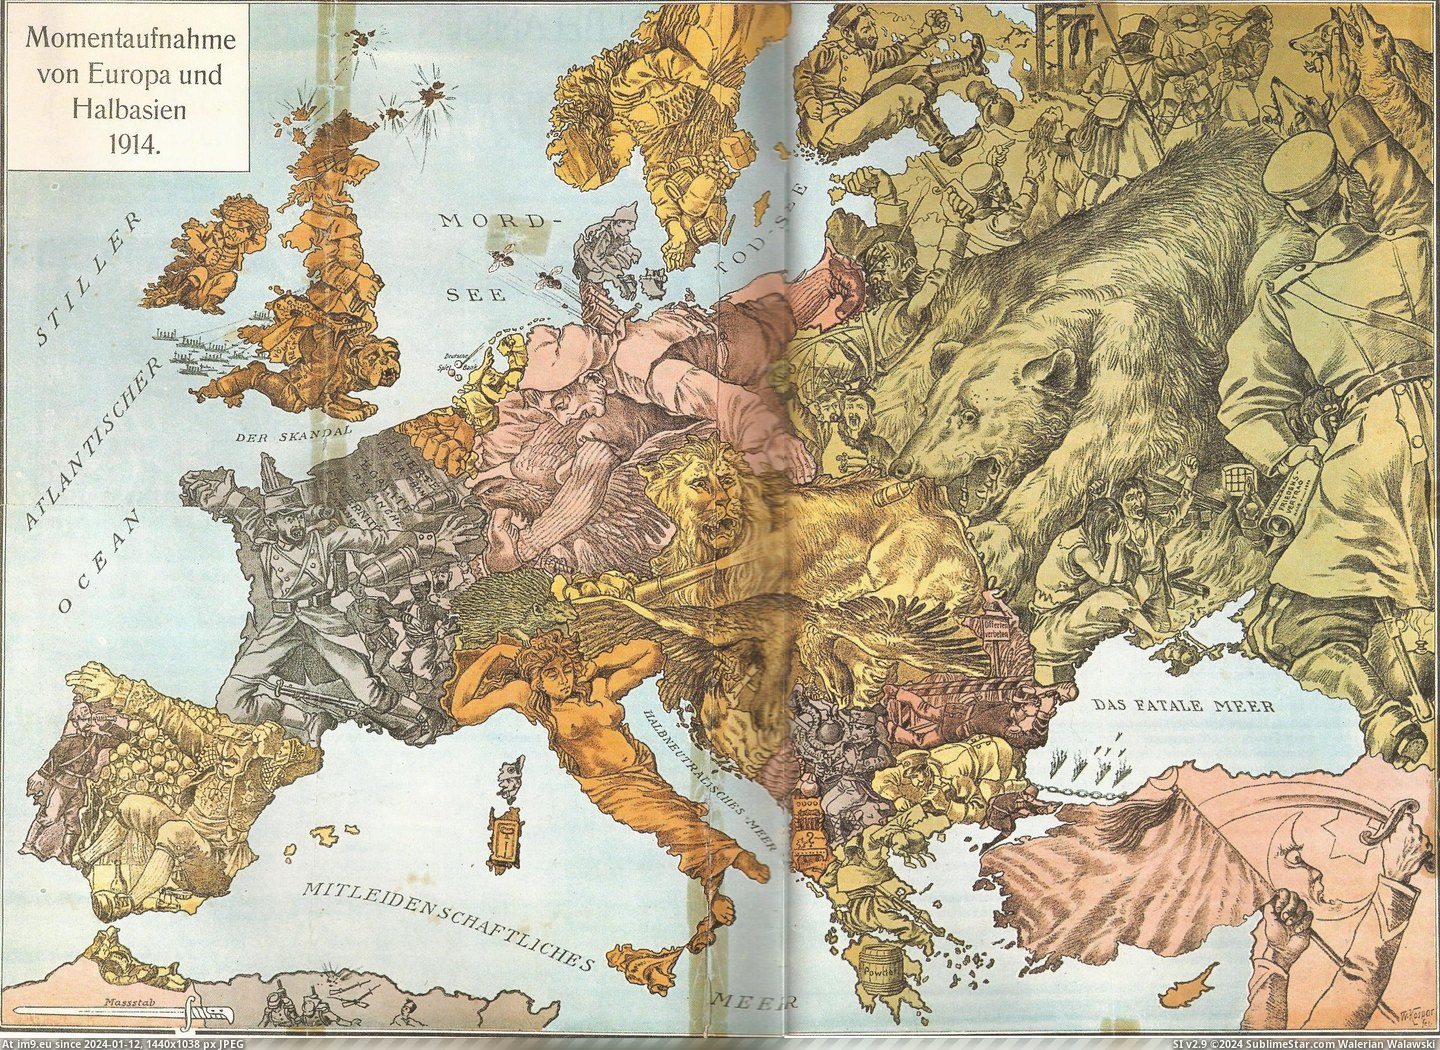 #Years #Map #Europe #Attic #Wwi #Ago #Grandparents #Png [Mapporn] WWI satirical map of Europe - found in my grandparents attic years ago [2493x1809][PNG] Pic. (Bild von album My r/MAPS favs))